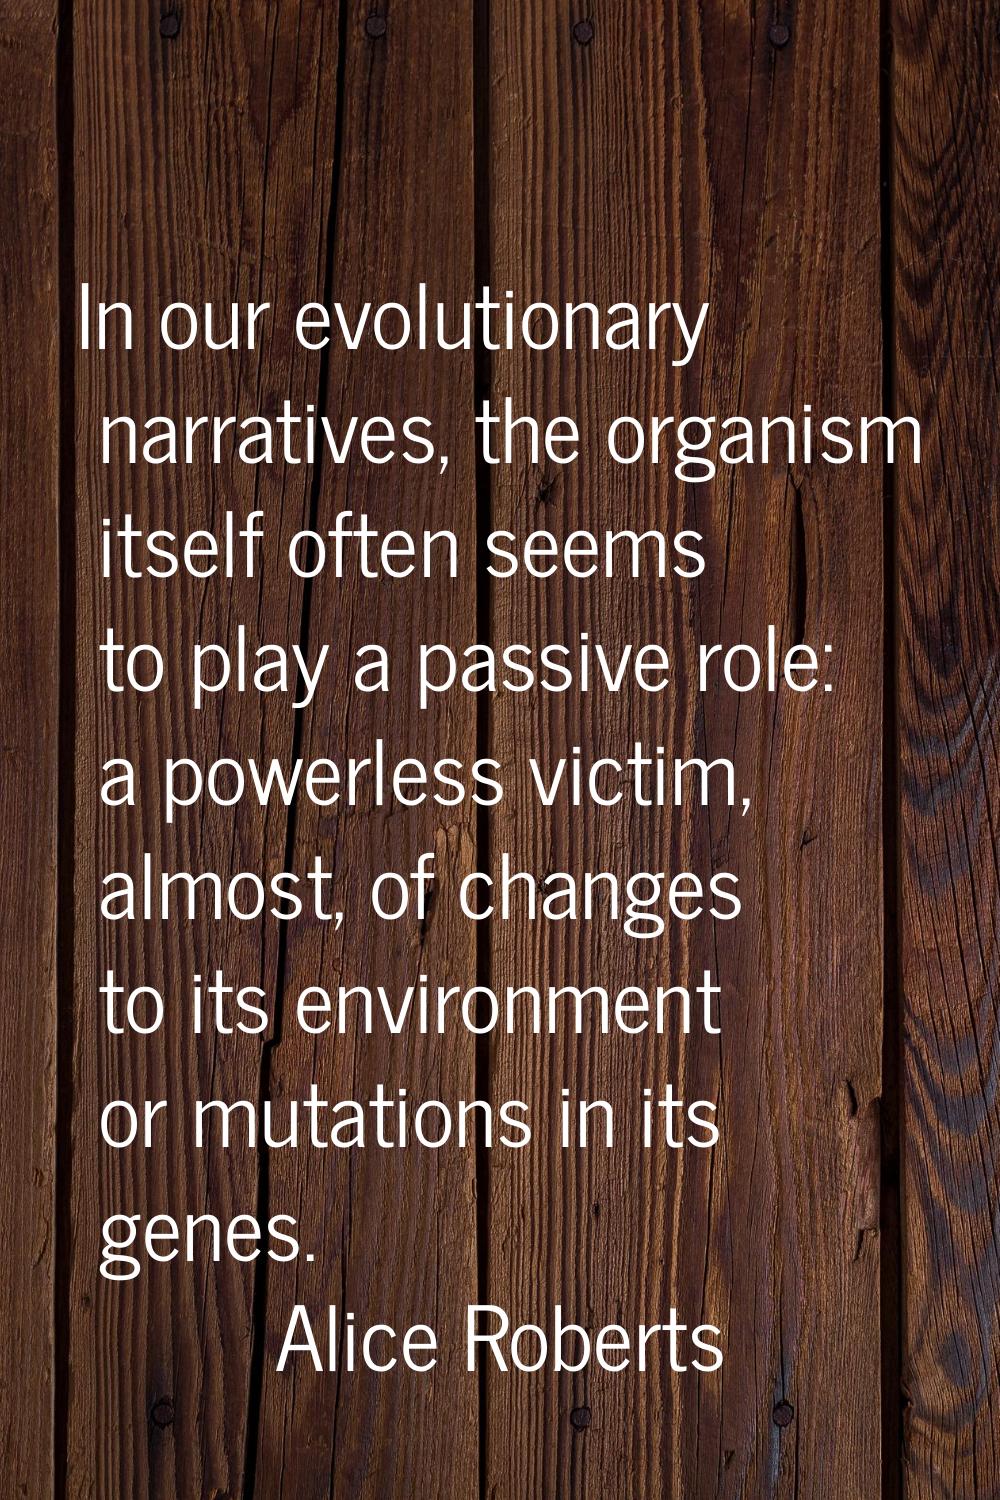 In our evolutionary narratives, the organism itself often seems to play a passive role: a powerless